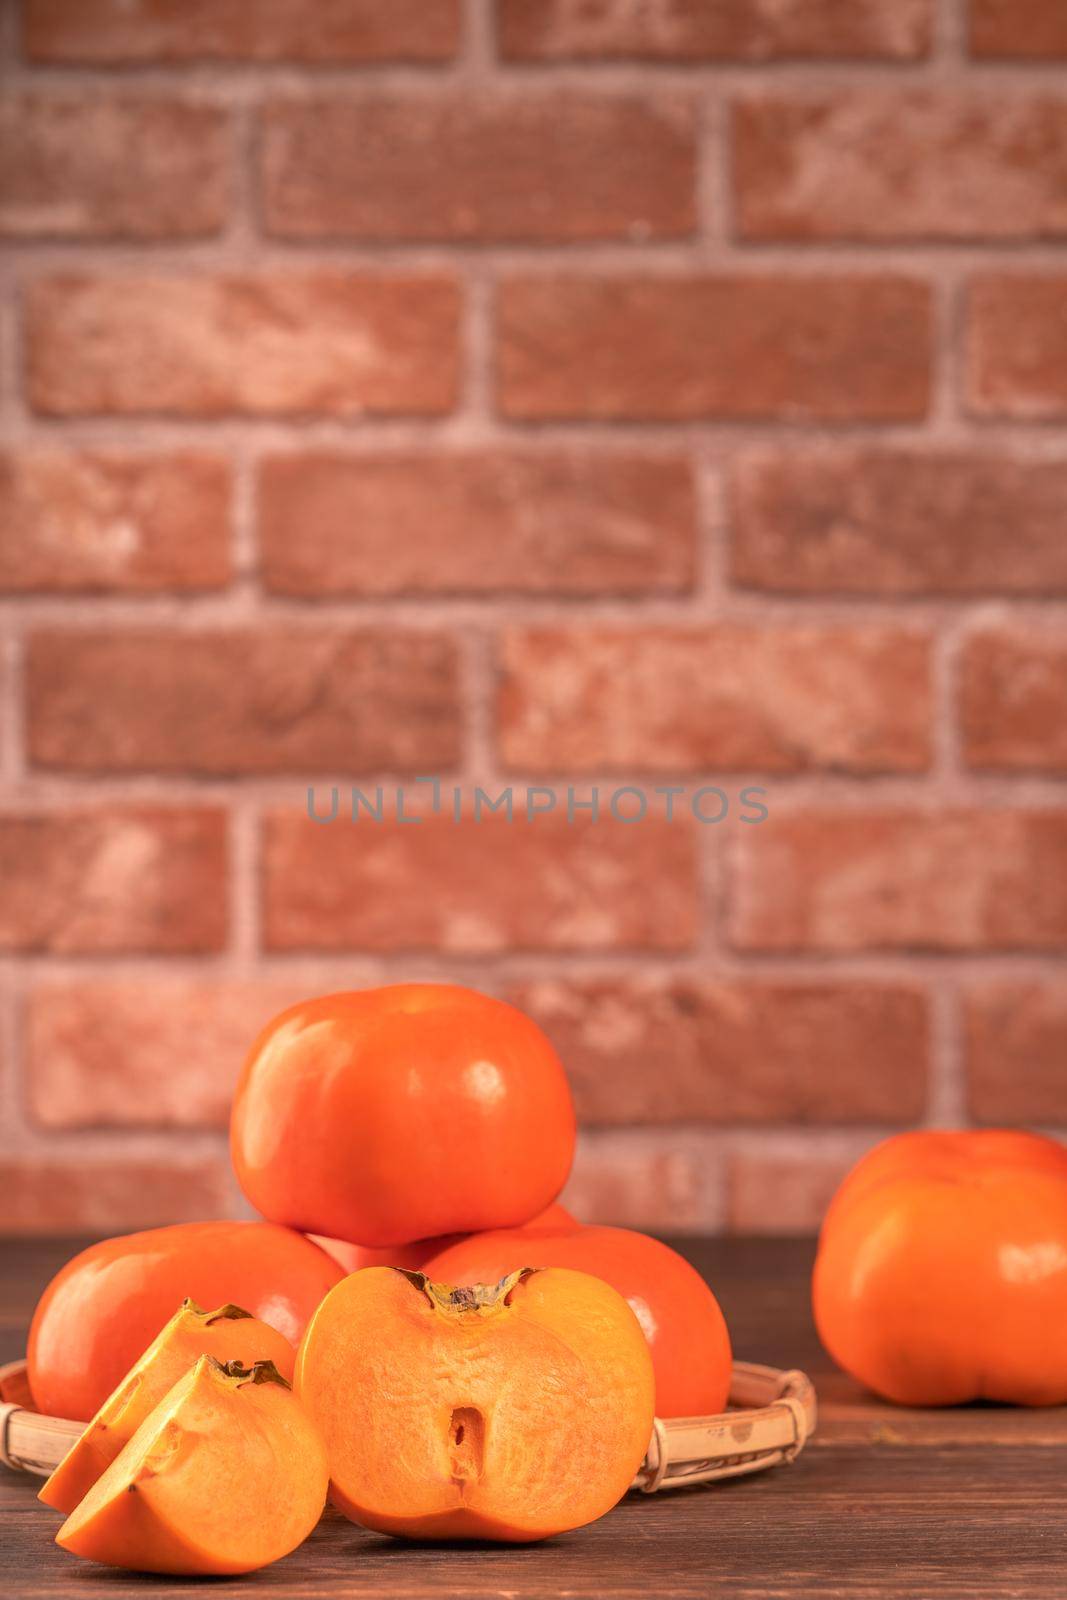 Sliced sweet persimmon kaki in a bamboo sieve basket on dark wooden table with red brick wall background, Chinese lunar new year fruit design concept, close up. by ROMIXIMAGE